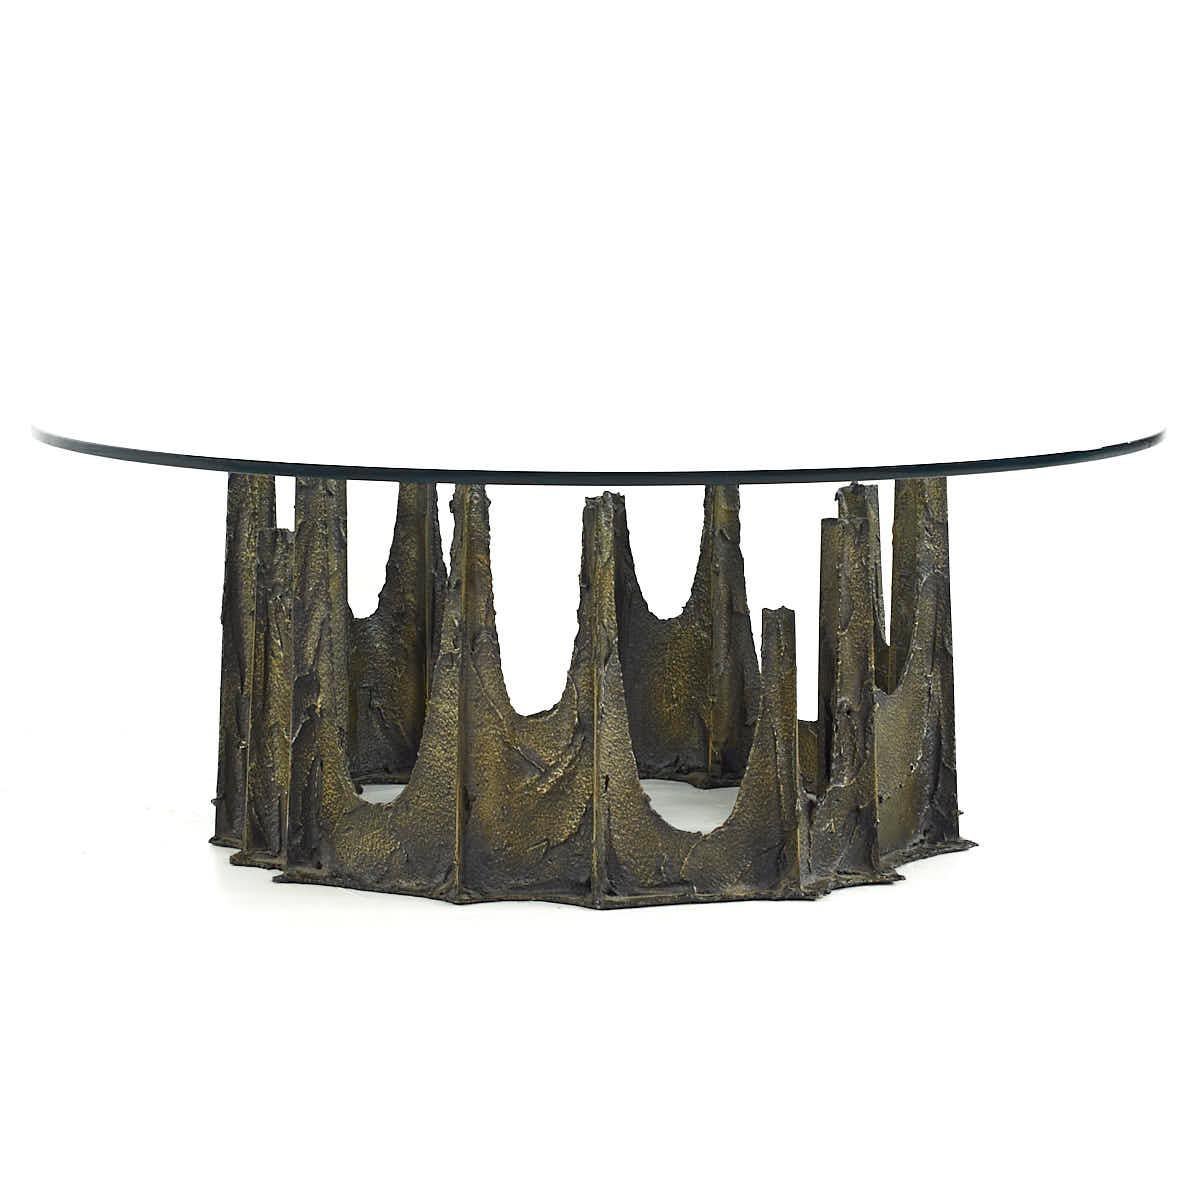 Paul Evans mid-century 1972 Stalagmite Round Coffee Table.
This coffee table measures: 42 wide x 42 deep x 16 inches high.
All pieces of furniture can be had in what we call restored vintage condition. That means the piece is restored upon purchase